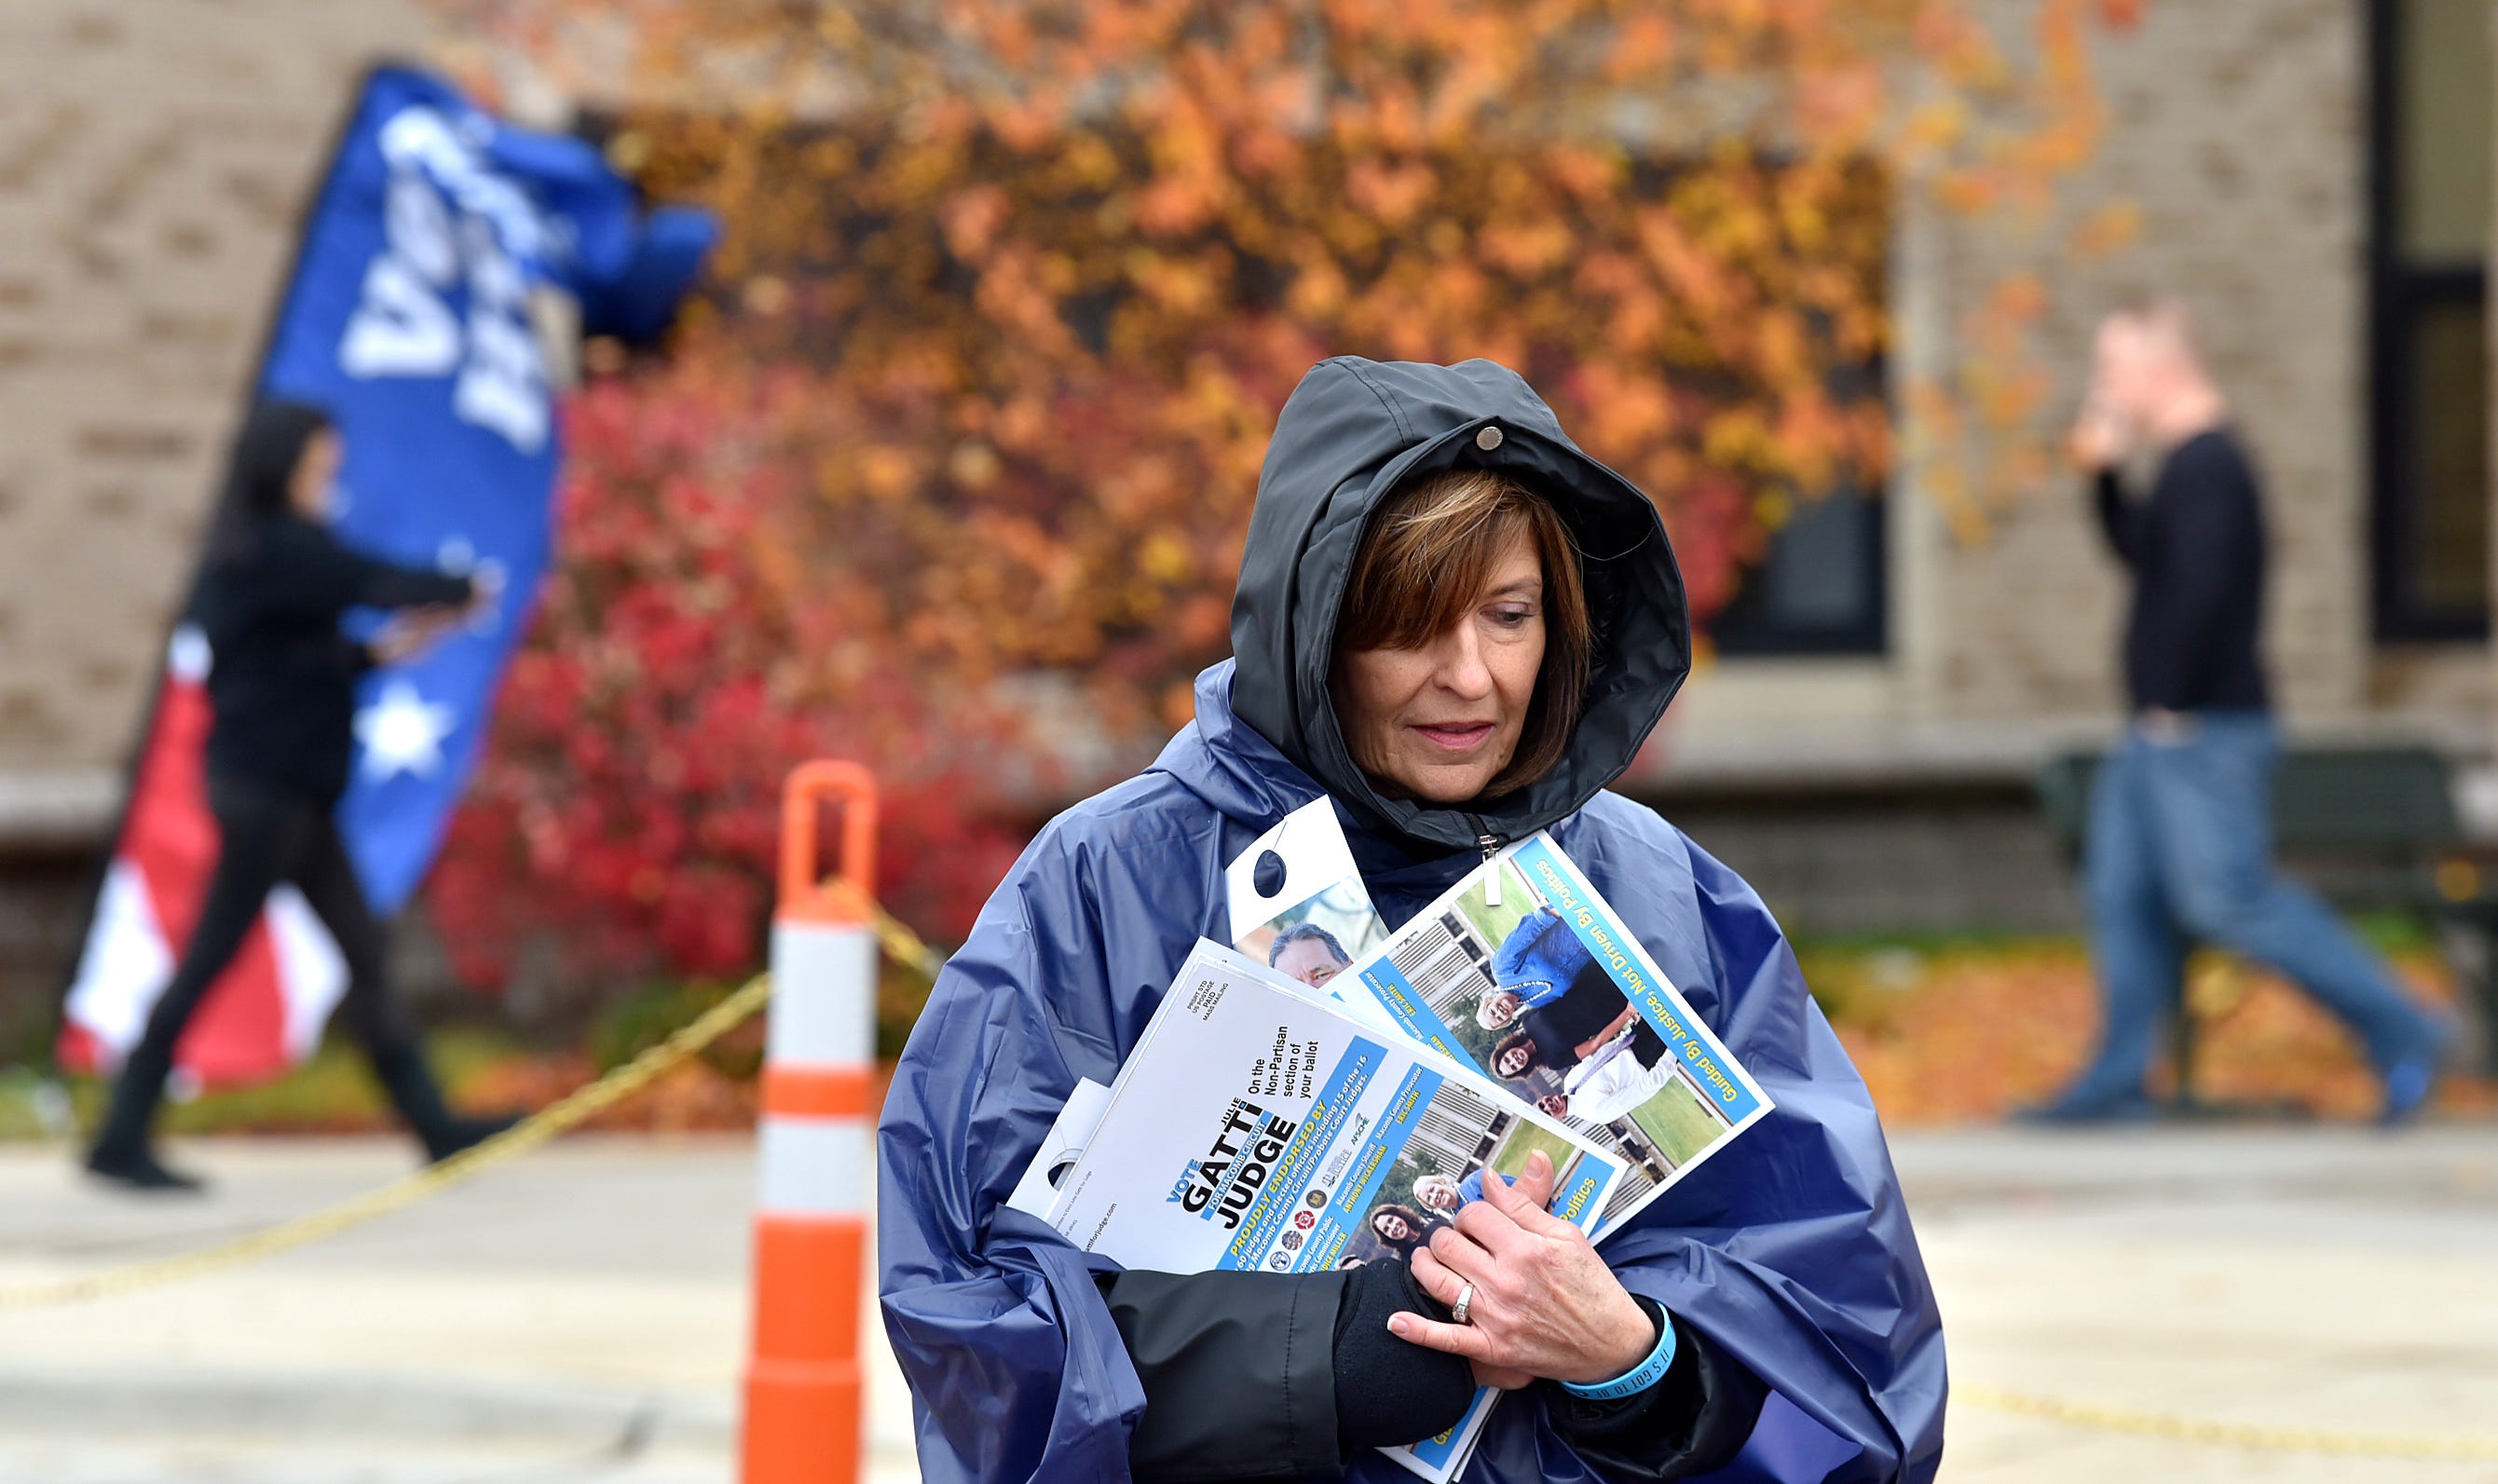 With blustery winds, rain and temperatures in the mid-50s, Linda Anderson of Macomb Township is bundled up to hand out campaign literature outside Ojibwa Elementary School. She is a volunteer for Julie Gatti, a candidate for Macomb County Circuit Court Judge.